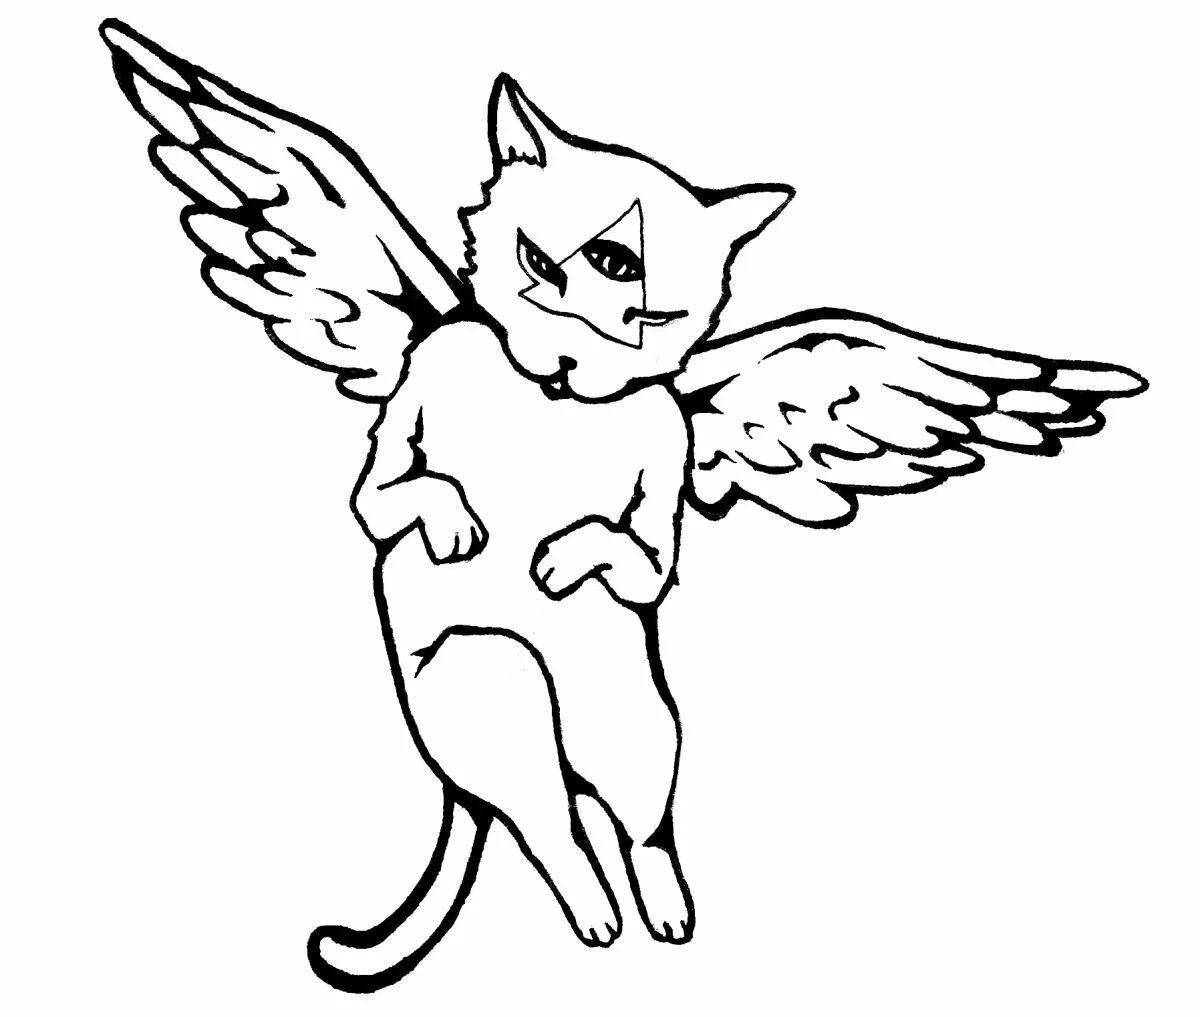 Fantastic flying cat coloring page